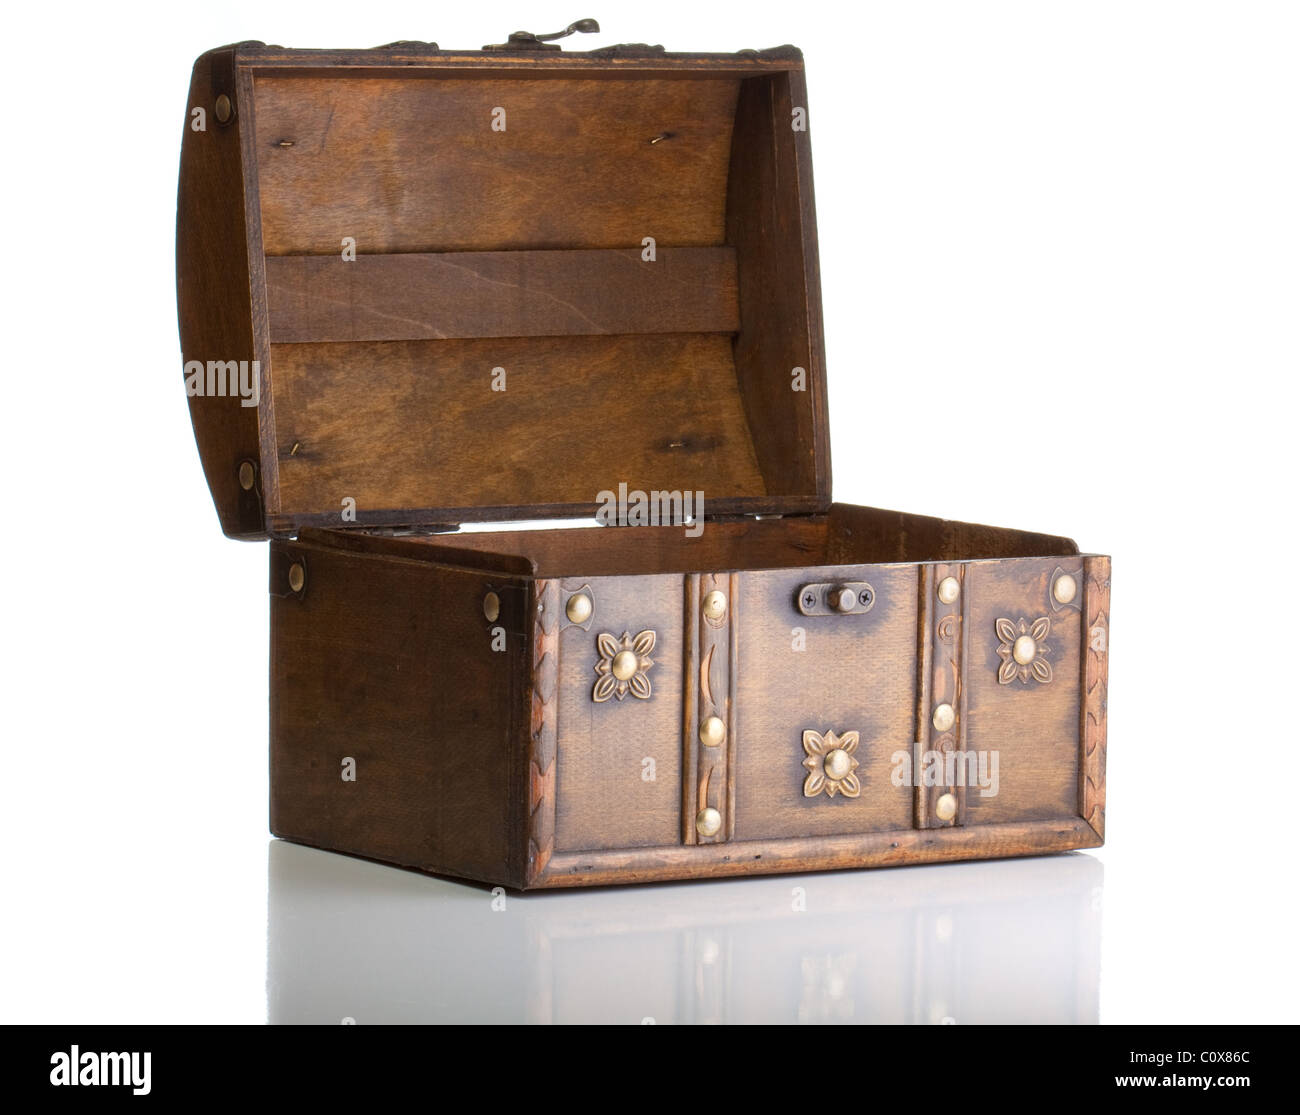 Opened Small Treasure Chest Stock Photo, Picture and Royalty Free